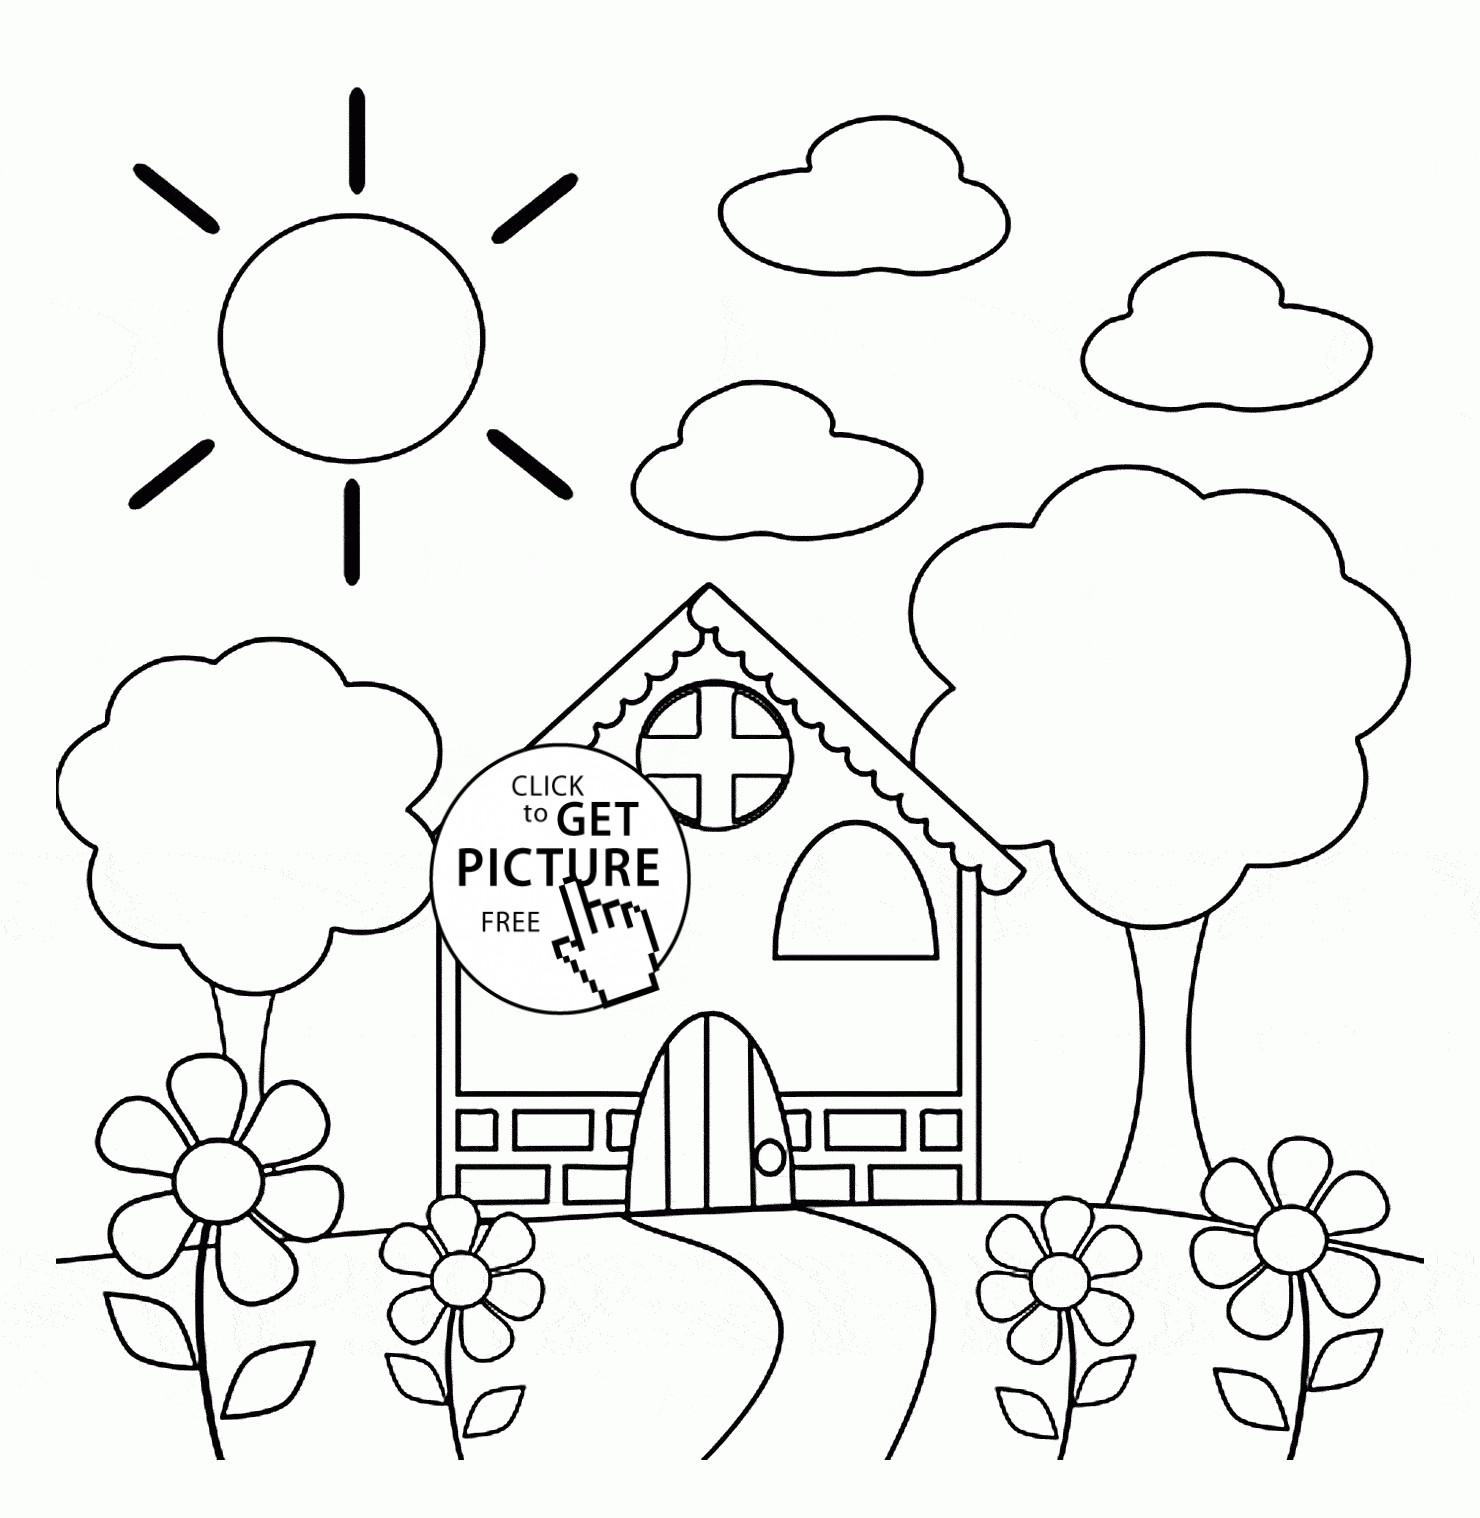 Preschool Coloring Sheets Spring
 52 Preschool Coloring Pages Spring Free Cut And Paste